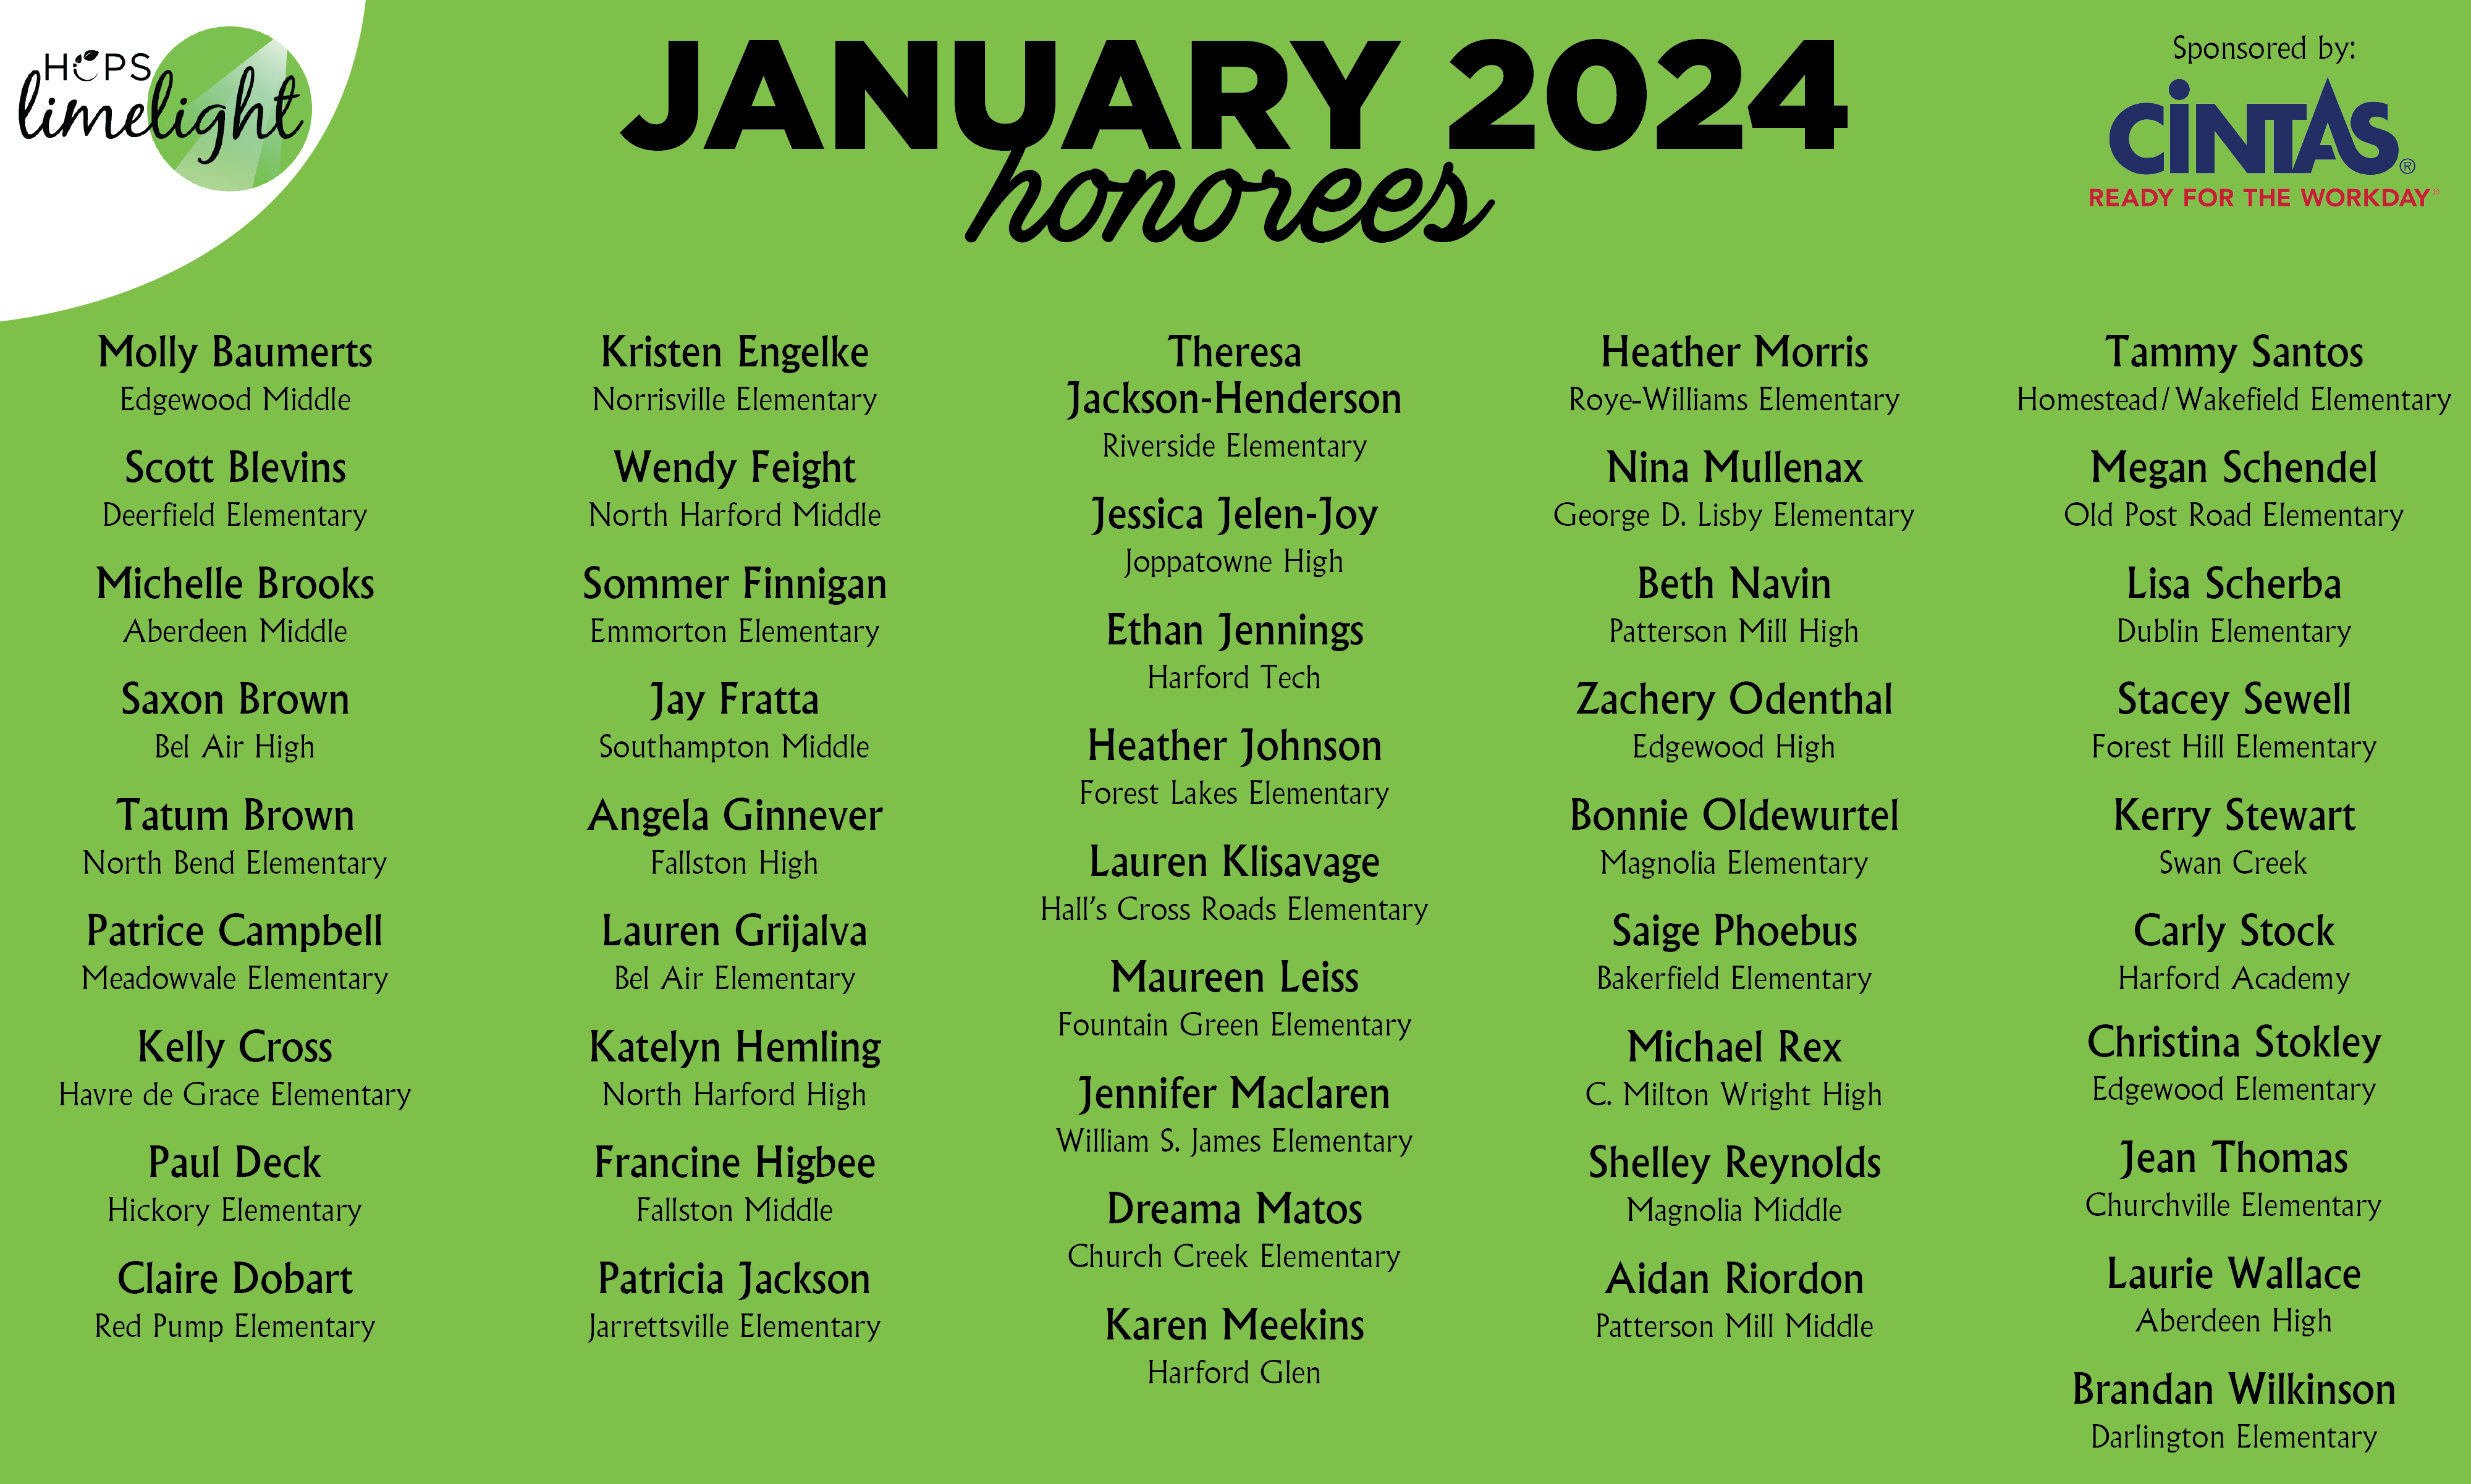 HCPS Limelight Honorees - January 2024